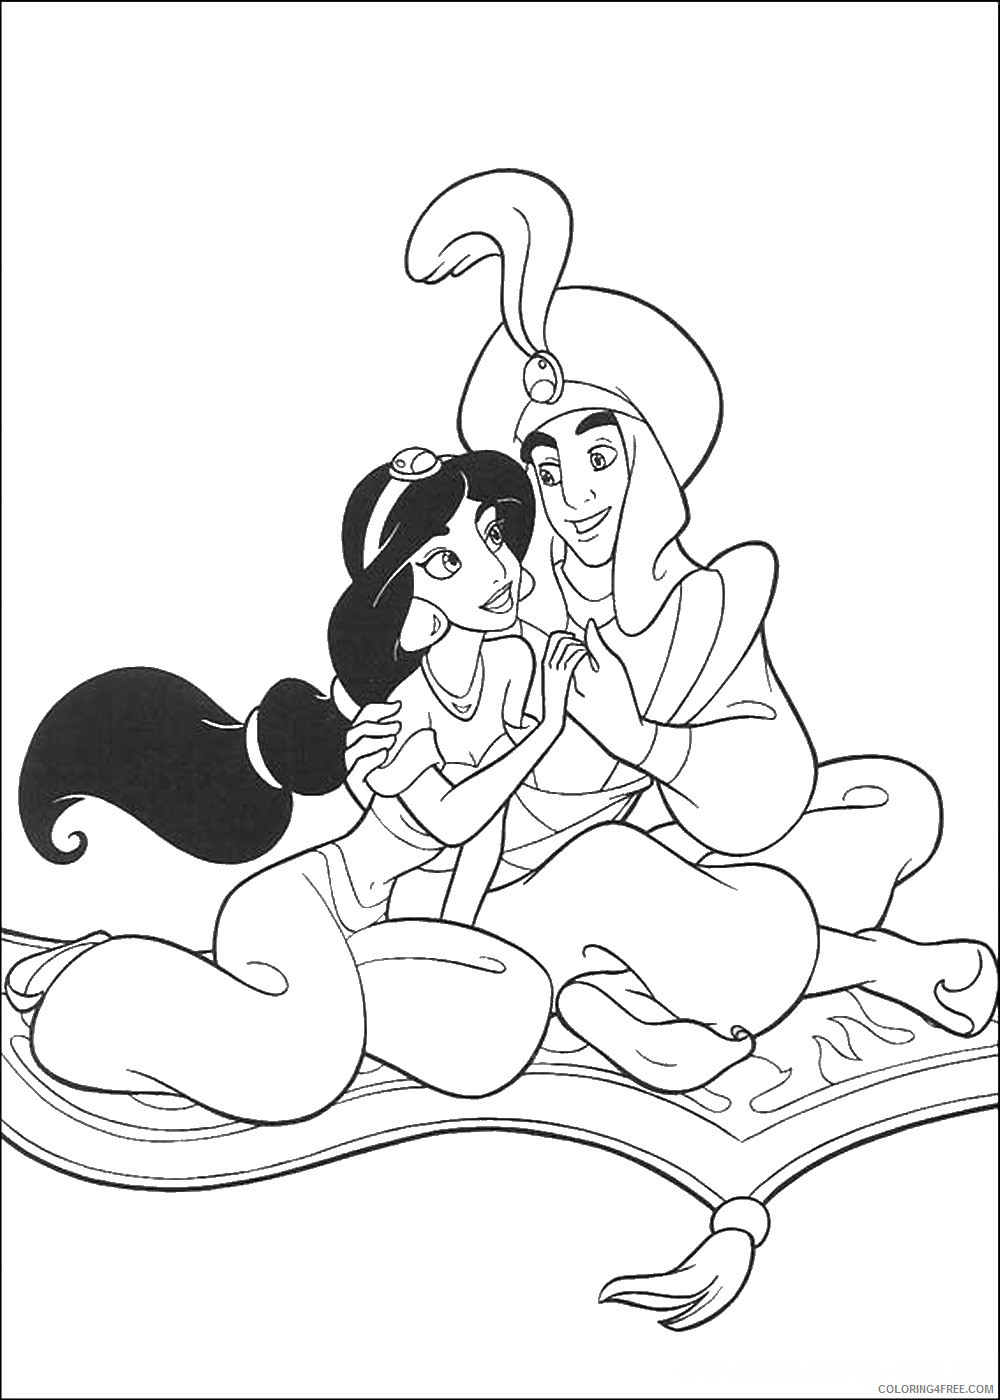 Aladdin Coloring Pages Cartoons aladdin_23 Printable 2020 0301 Coloring4free